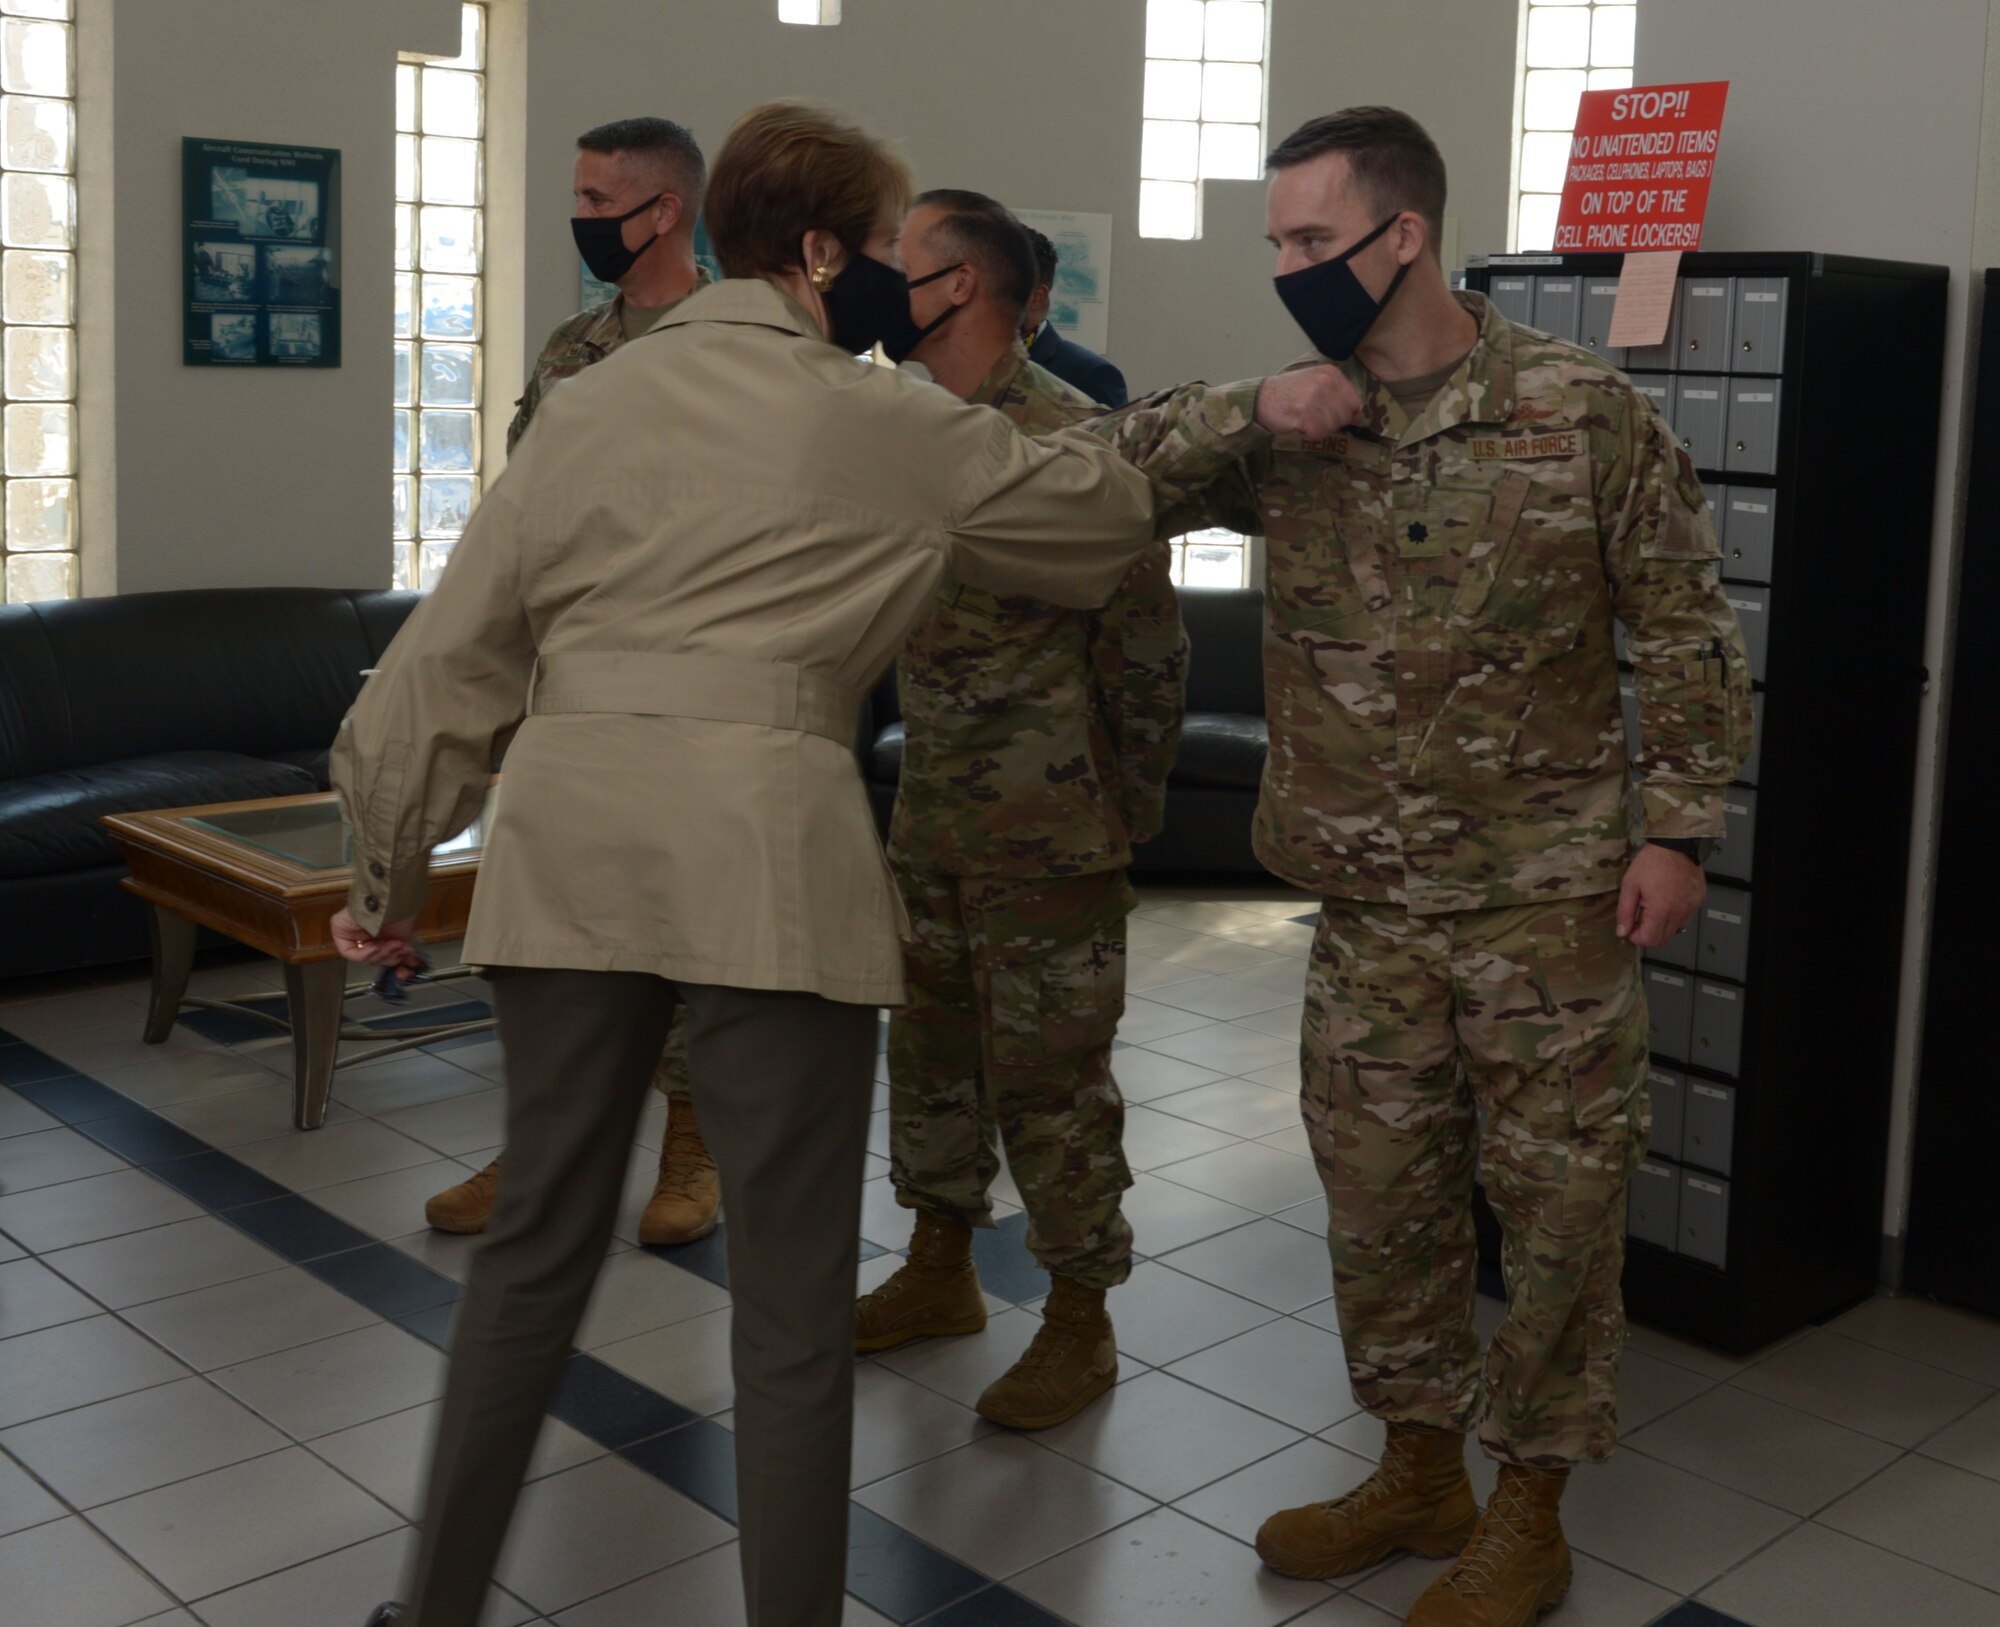 Lt. Col. John Heins, 91st Cyberspace Operations Squadron commander bumps elbows in greeting with SecAF Barbara M. Barrett